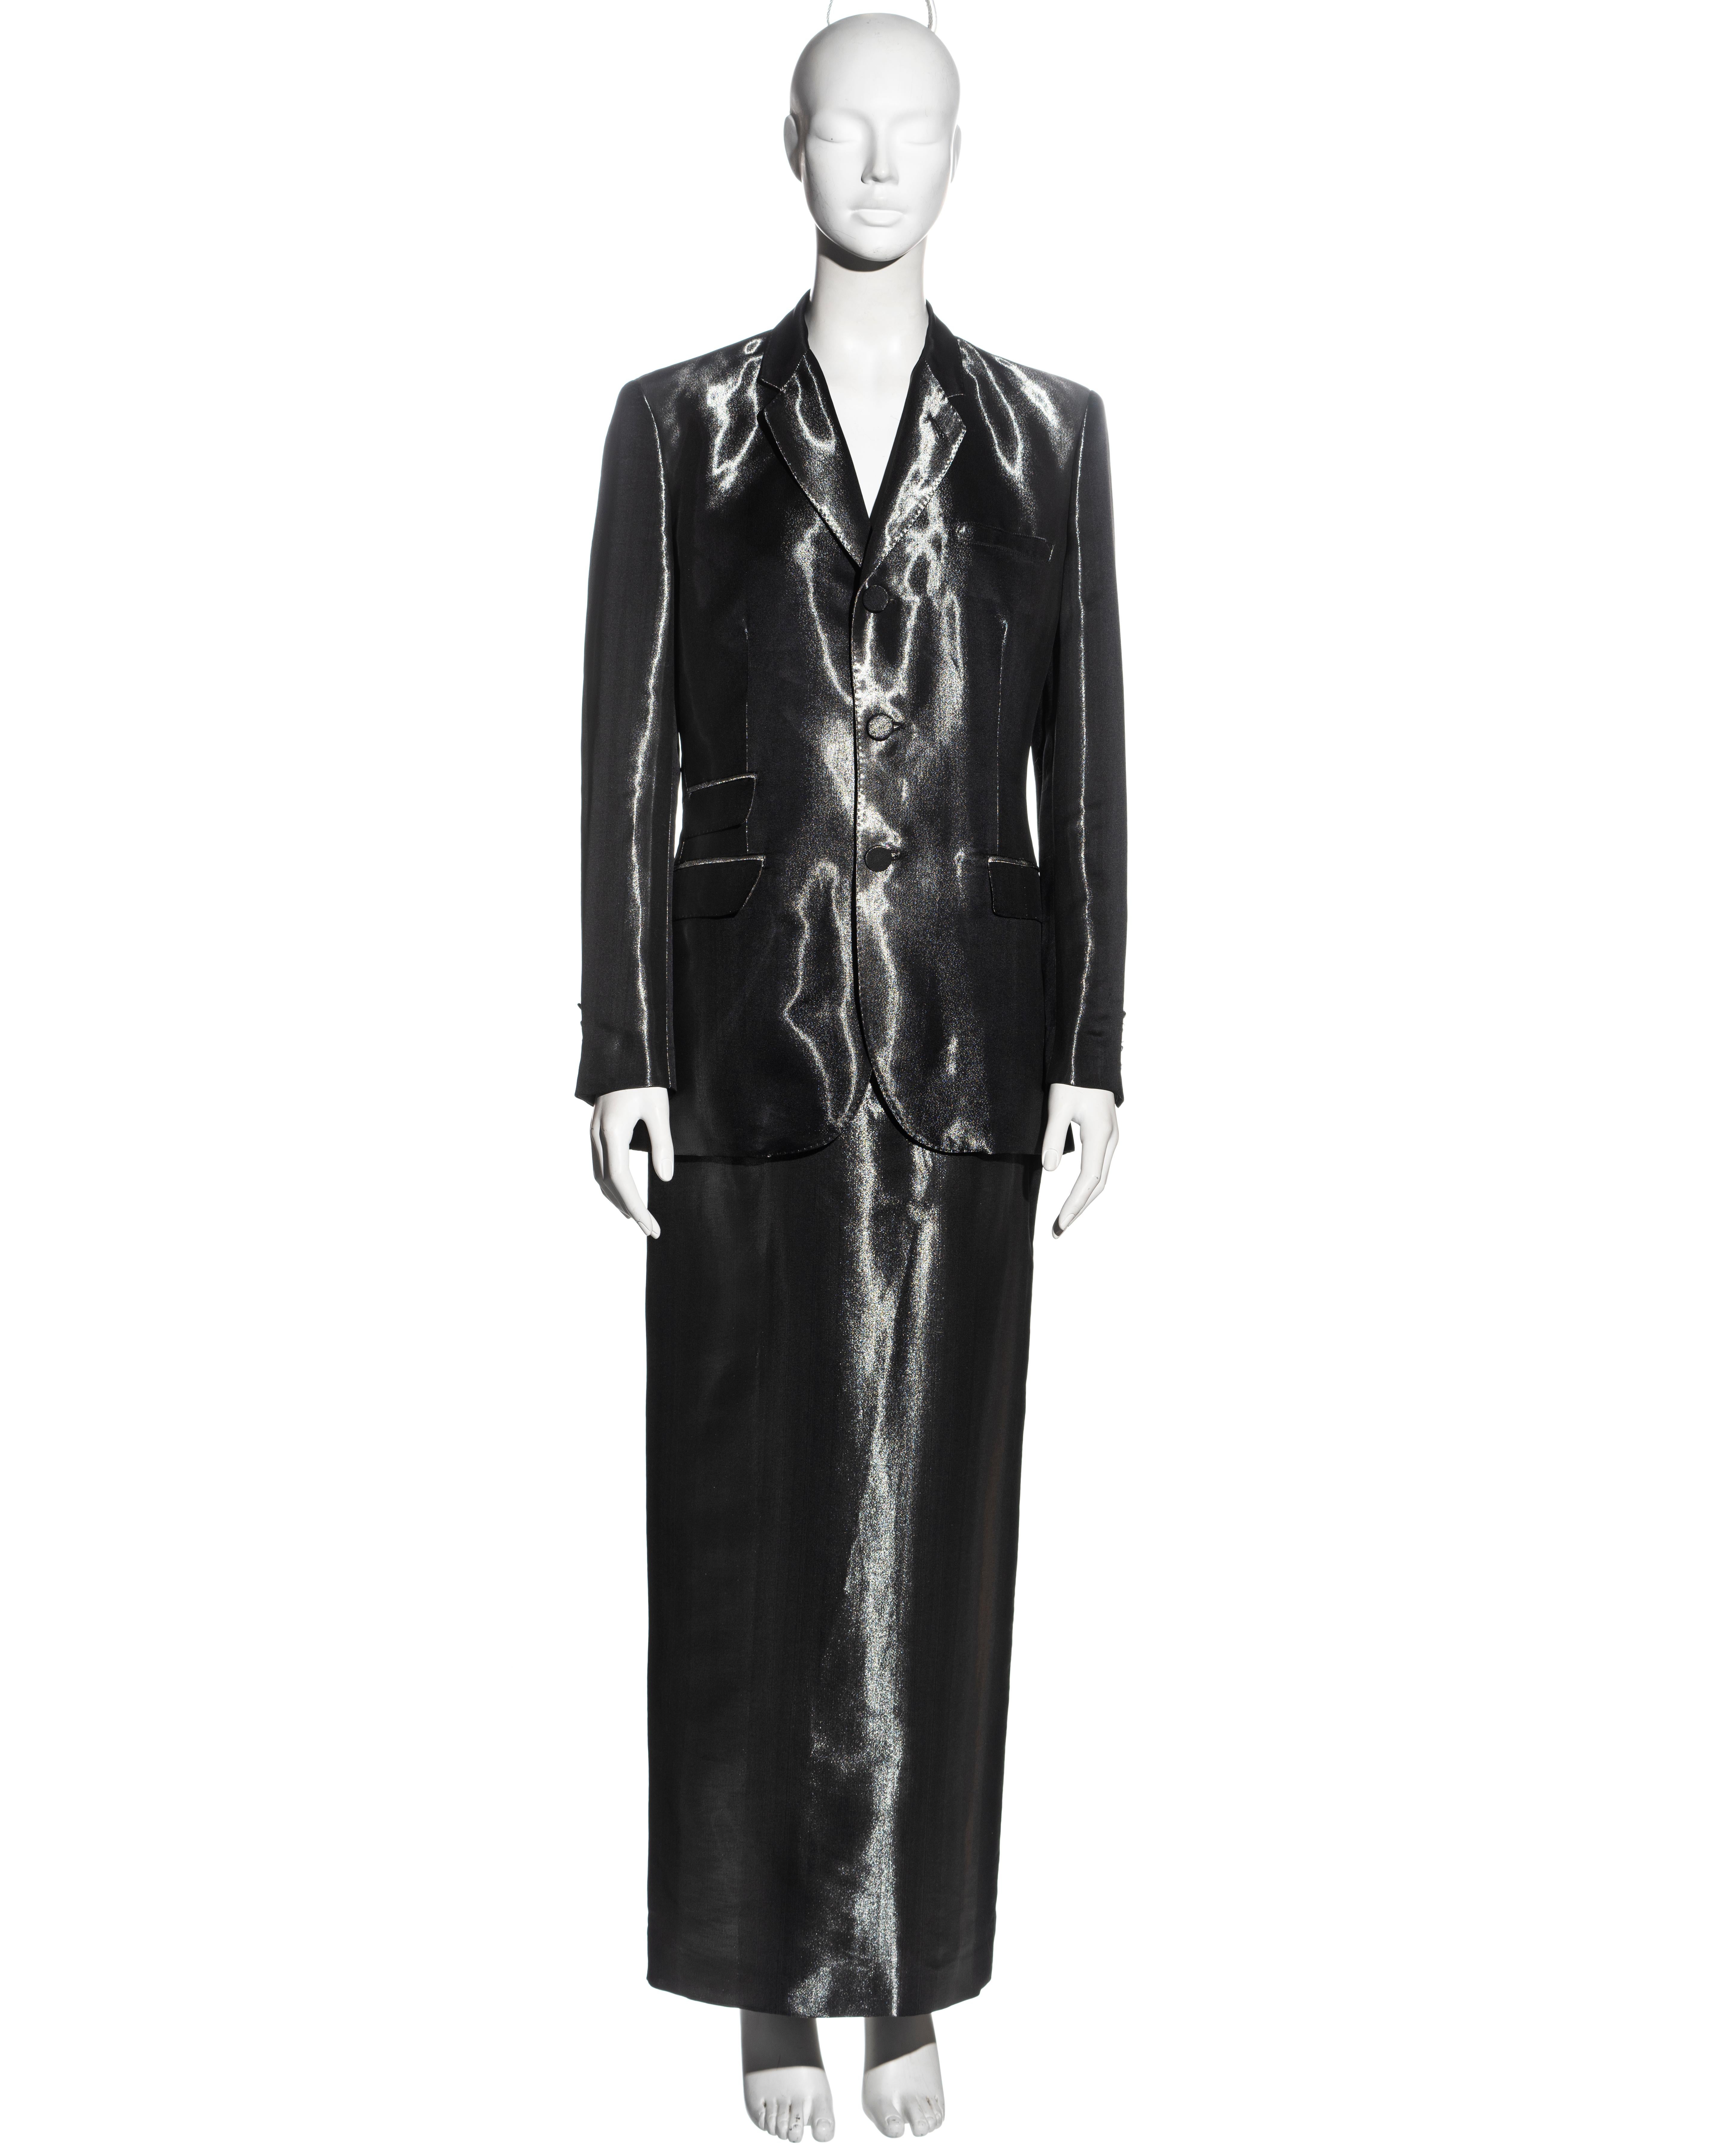 ▪ Jean Paul Gaultier skirt suit
▪ Striped metallic gunmetal silk-rayon 
▪ Single-breasted blazer jacket 
▪ Matching fabric buttons
▪ Maxi skirt with high slit at the centre-back with button closures 
▪ Skirt: IT 42 - FR 38 - UK 10 / Jacket: IT 44 -